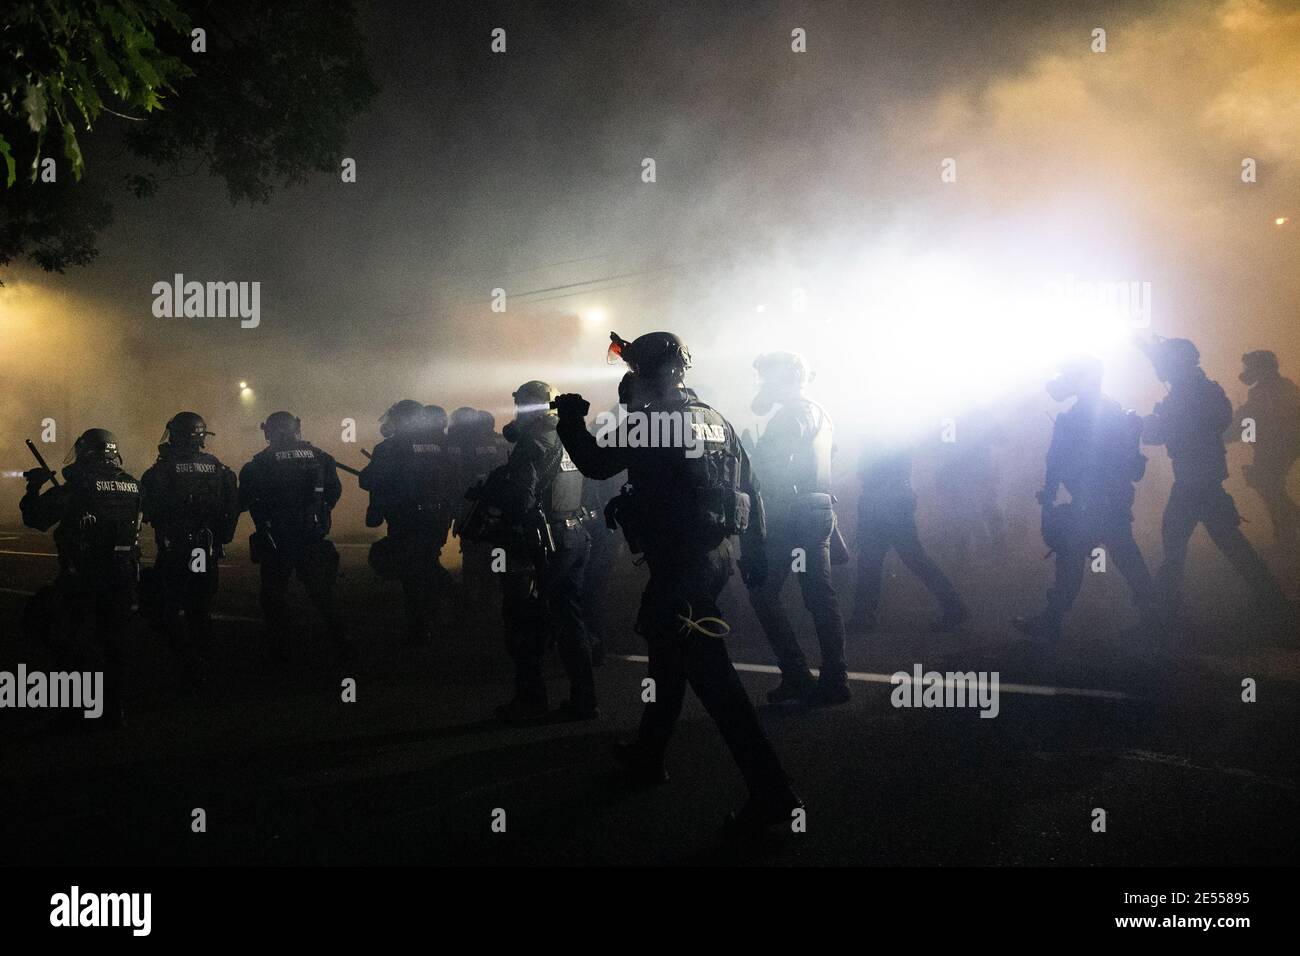 Portland Police officers disperse a crowd of protesters using CS gas and less lethal munitions on the 100th consecutive night of protests in Portland, Oregon, U.S. September 5, 2020. Picture taken September 5, 2020. REUTERS/Caitlin Ochs Stock Photo